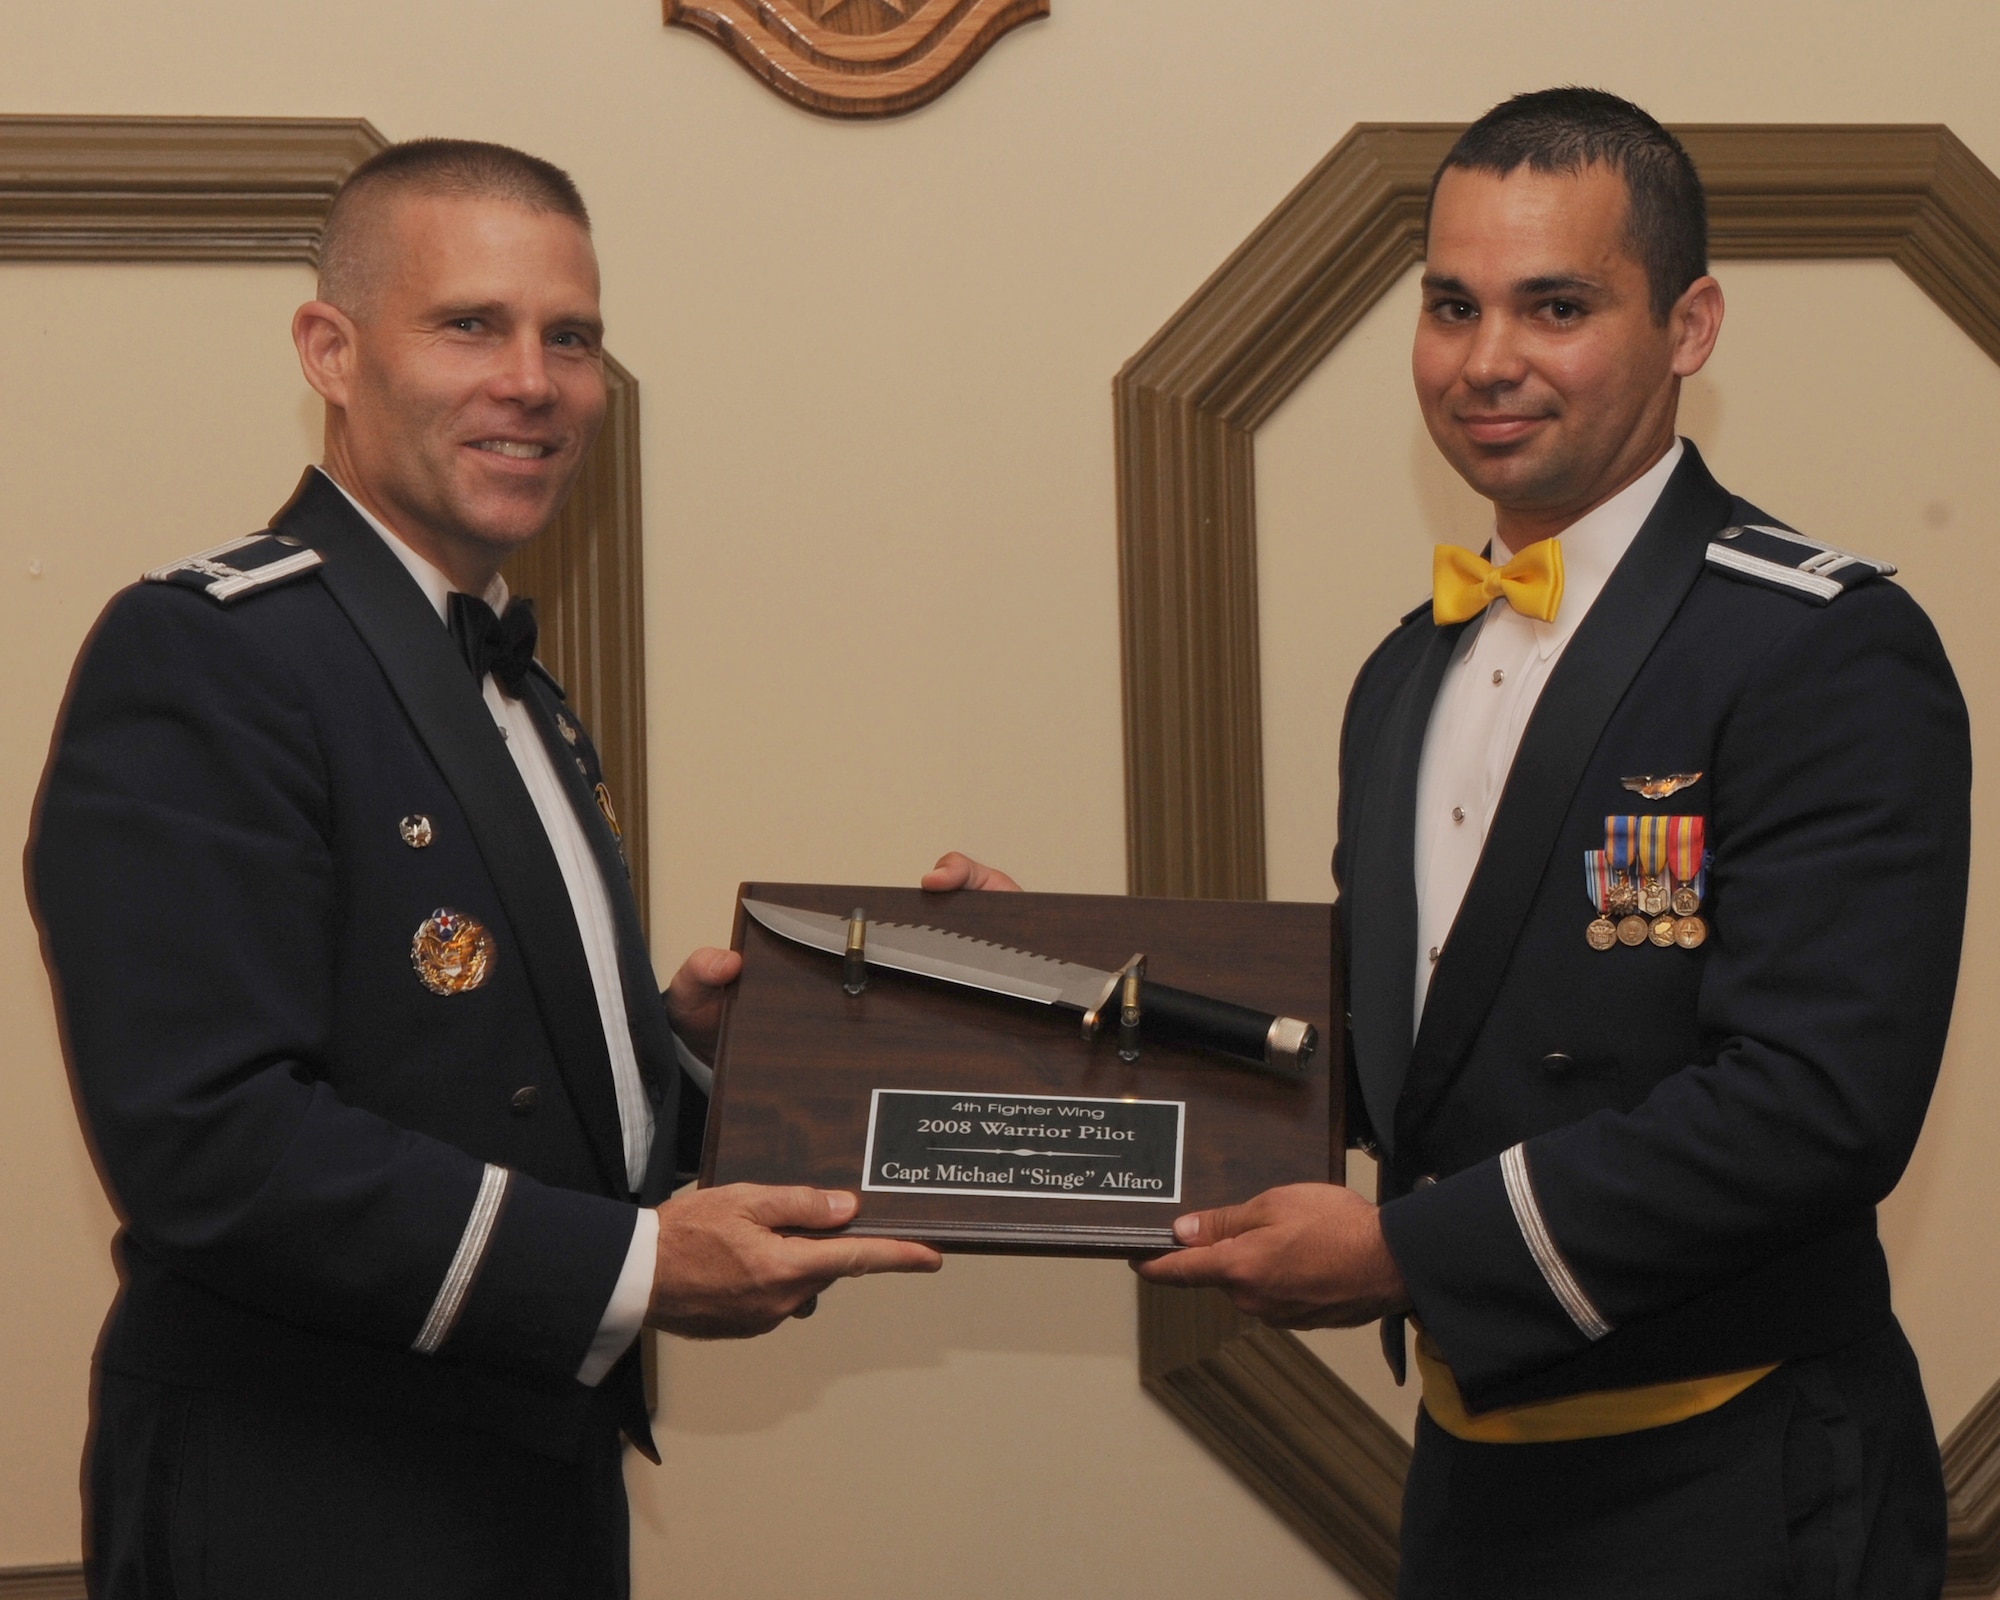 4th Fighter Wing commander Colonel Steve Kwast, presents Captain Michael Alfaro with an award for warrior pilot. Capt Mark is the wing's warrior pilot for 2007.